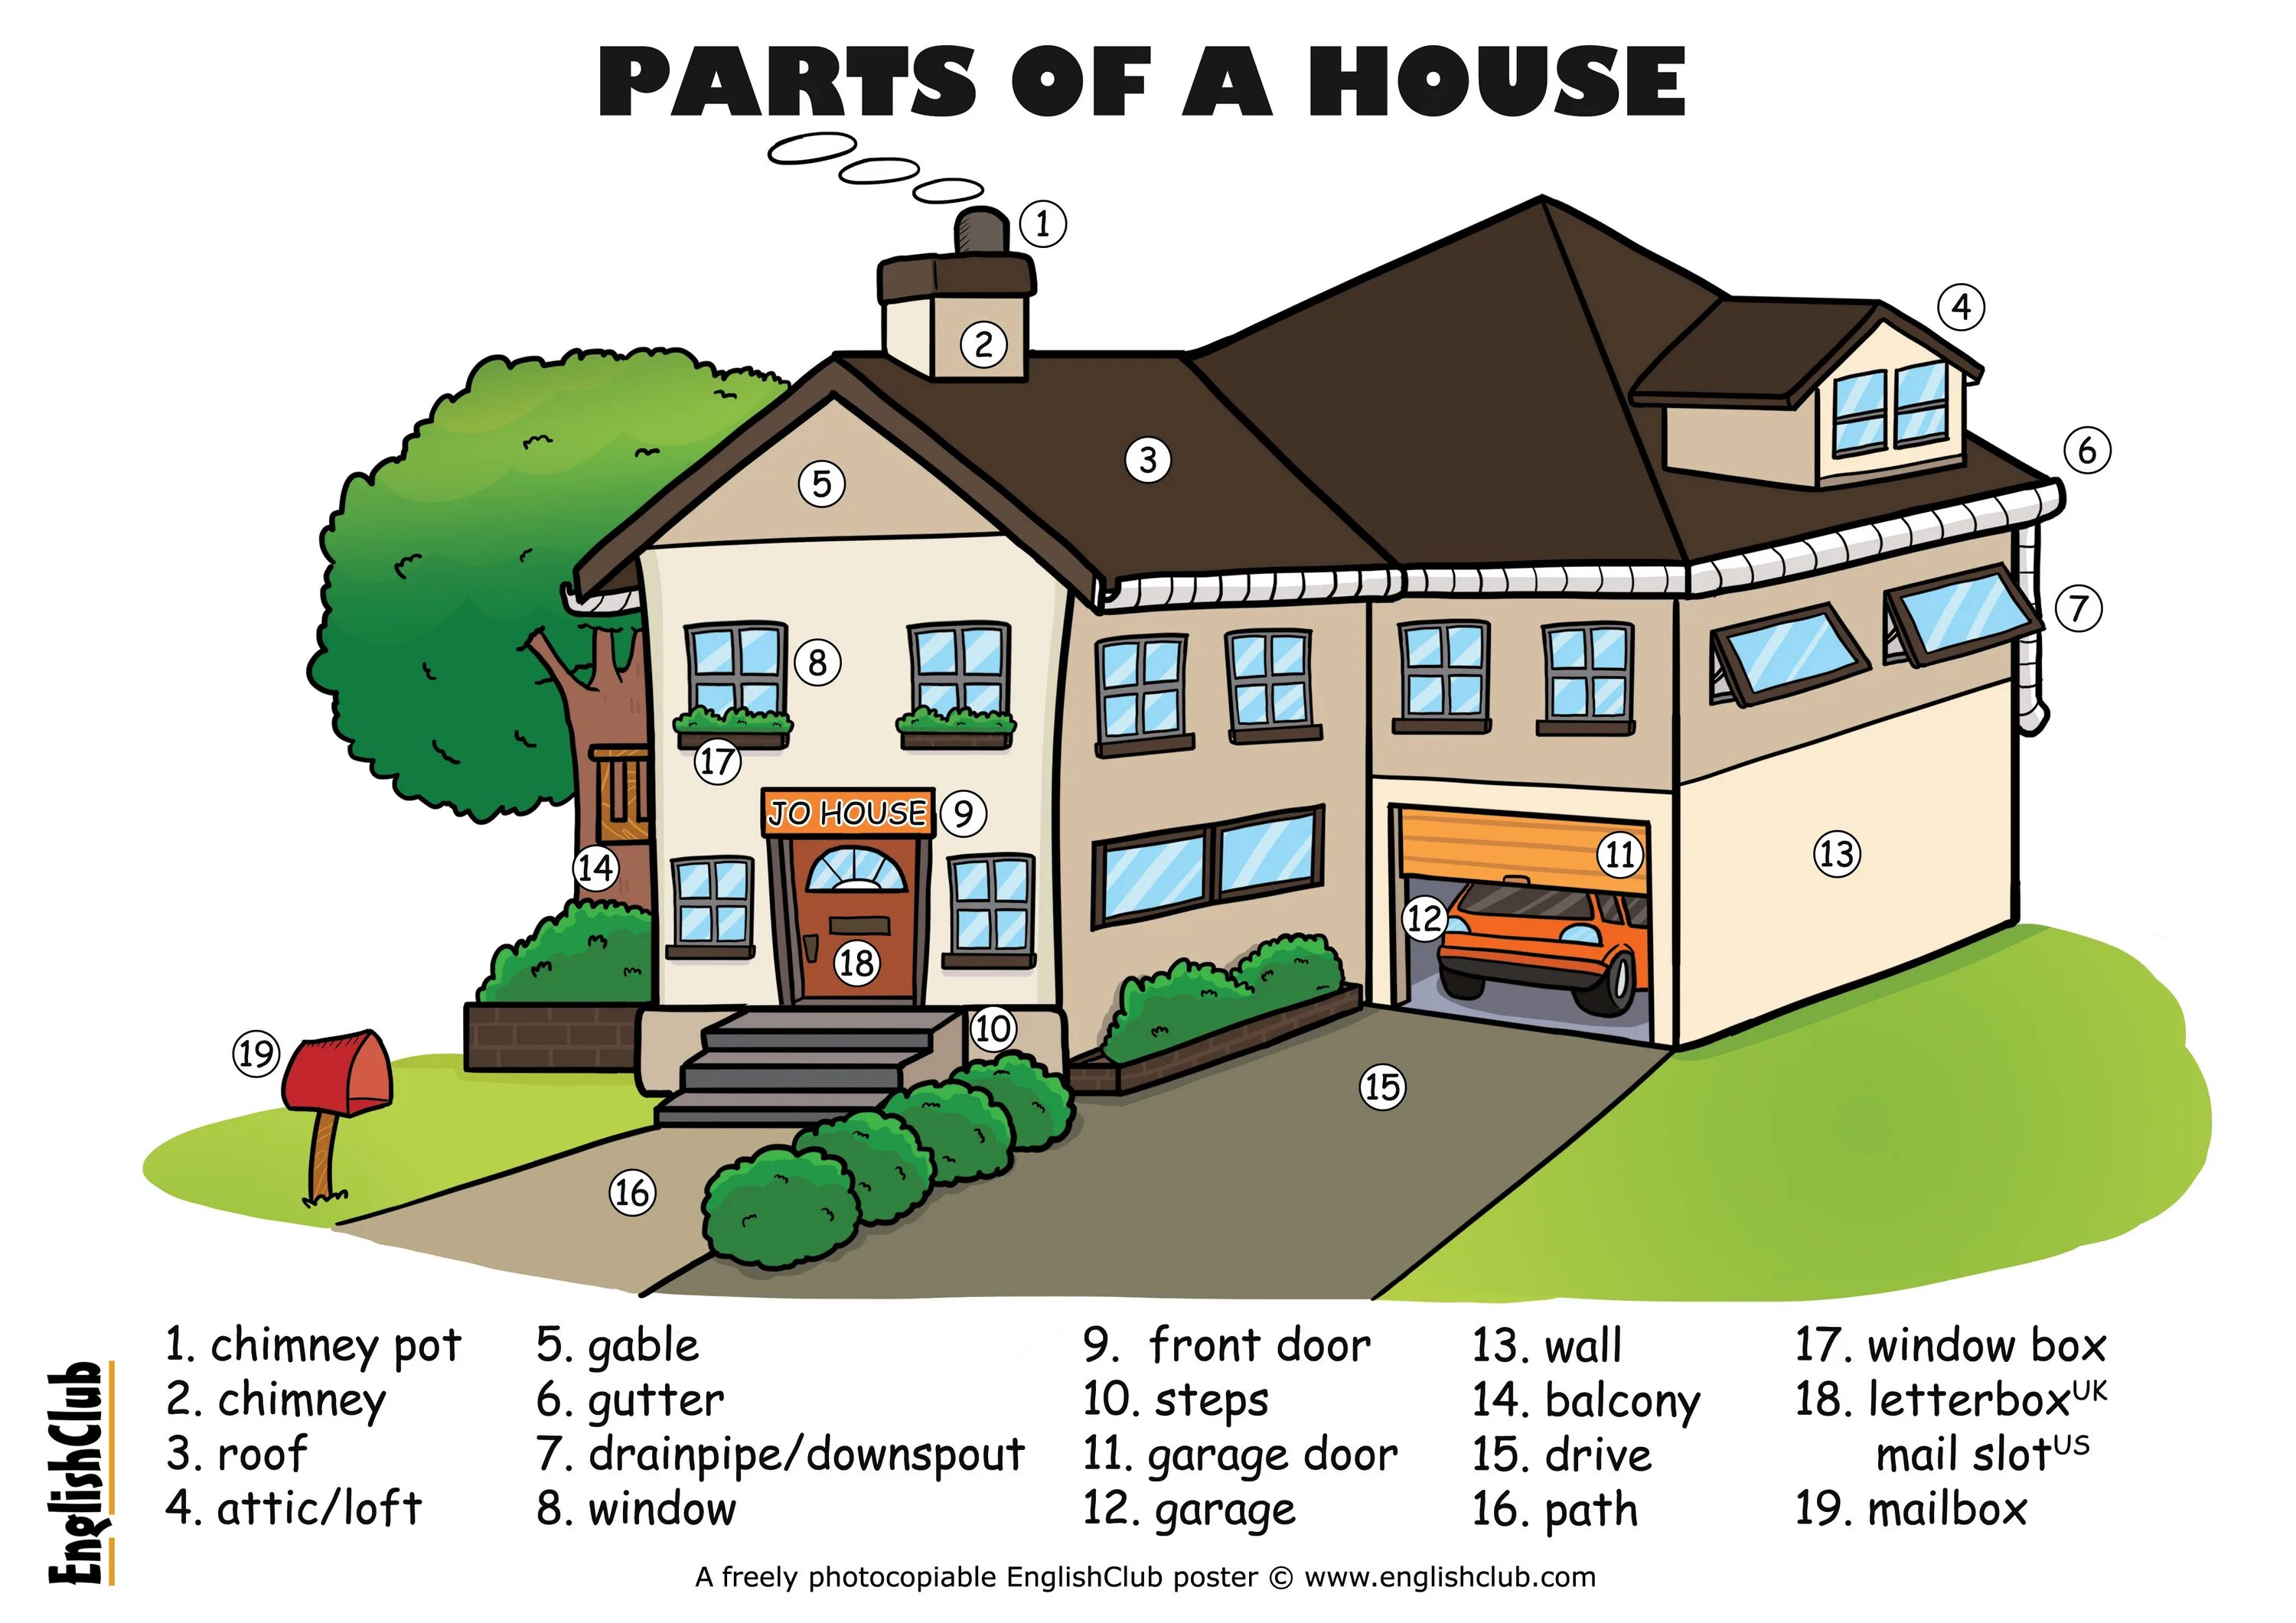 We like our house. Лексика по теме House. Parts of the House. House Vocabulary. Картинки по теме Parts of a House.